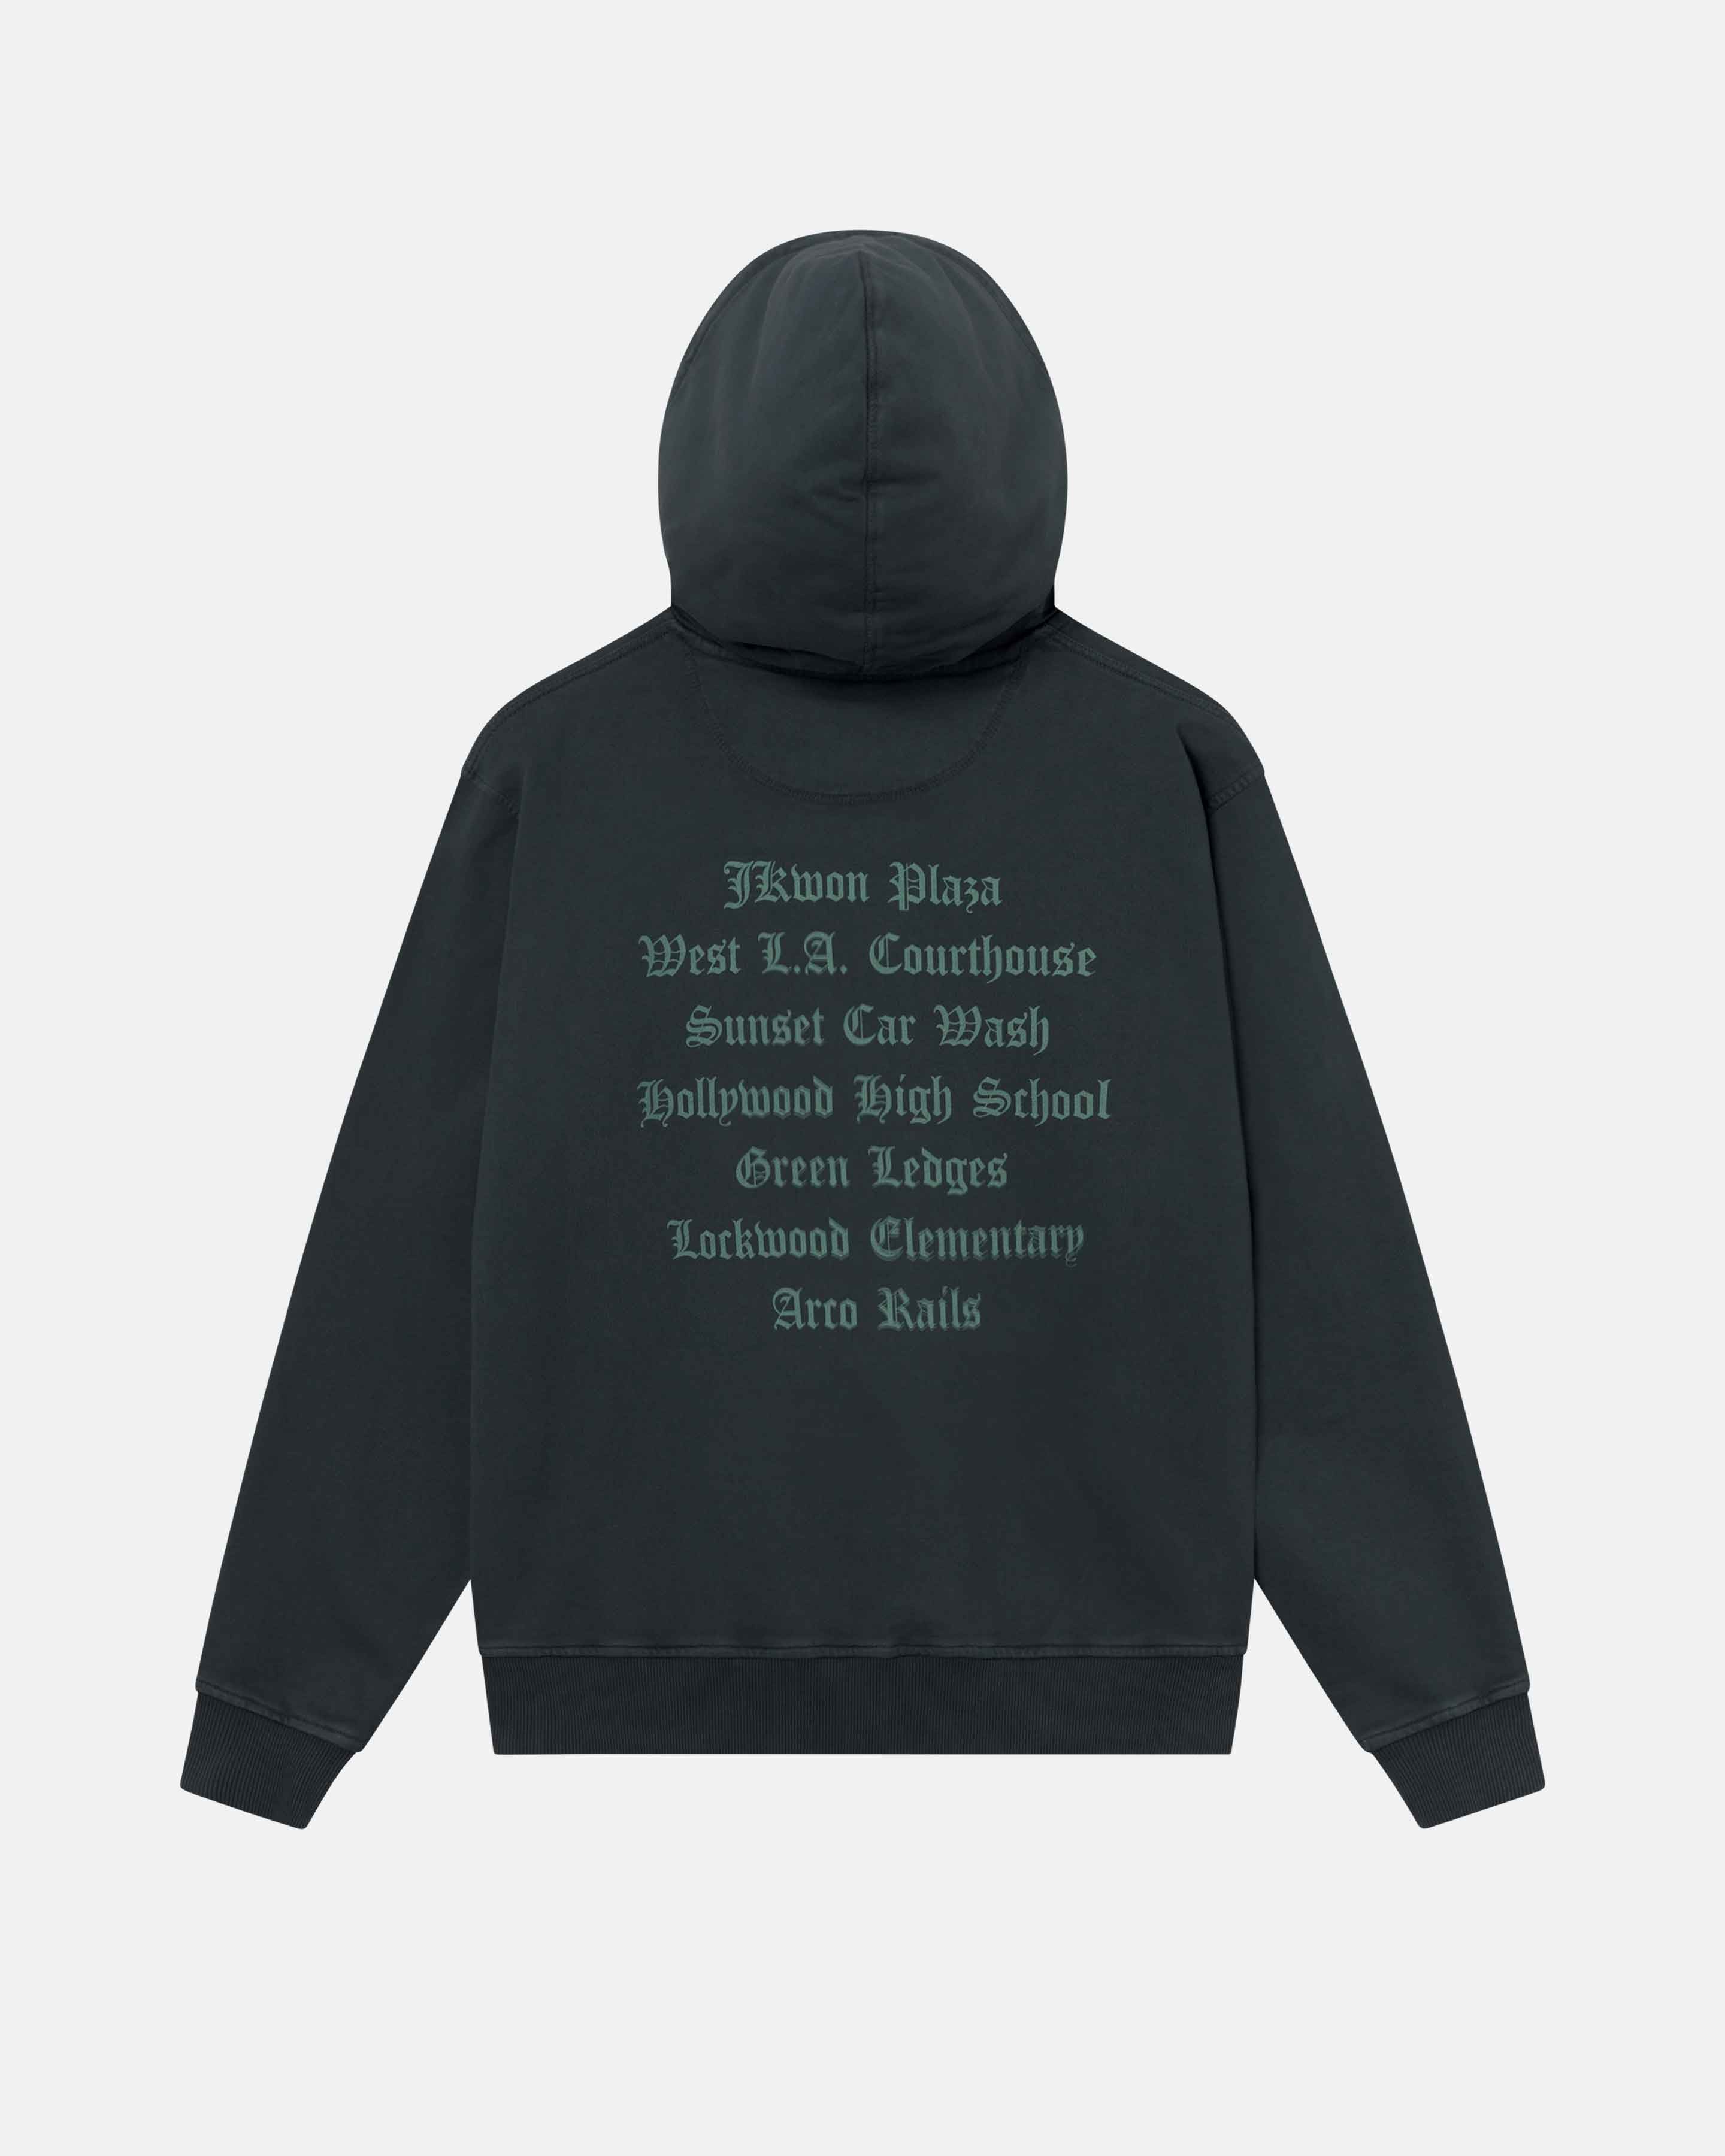 A black hoodie with a large green text print on its back